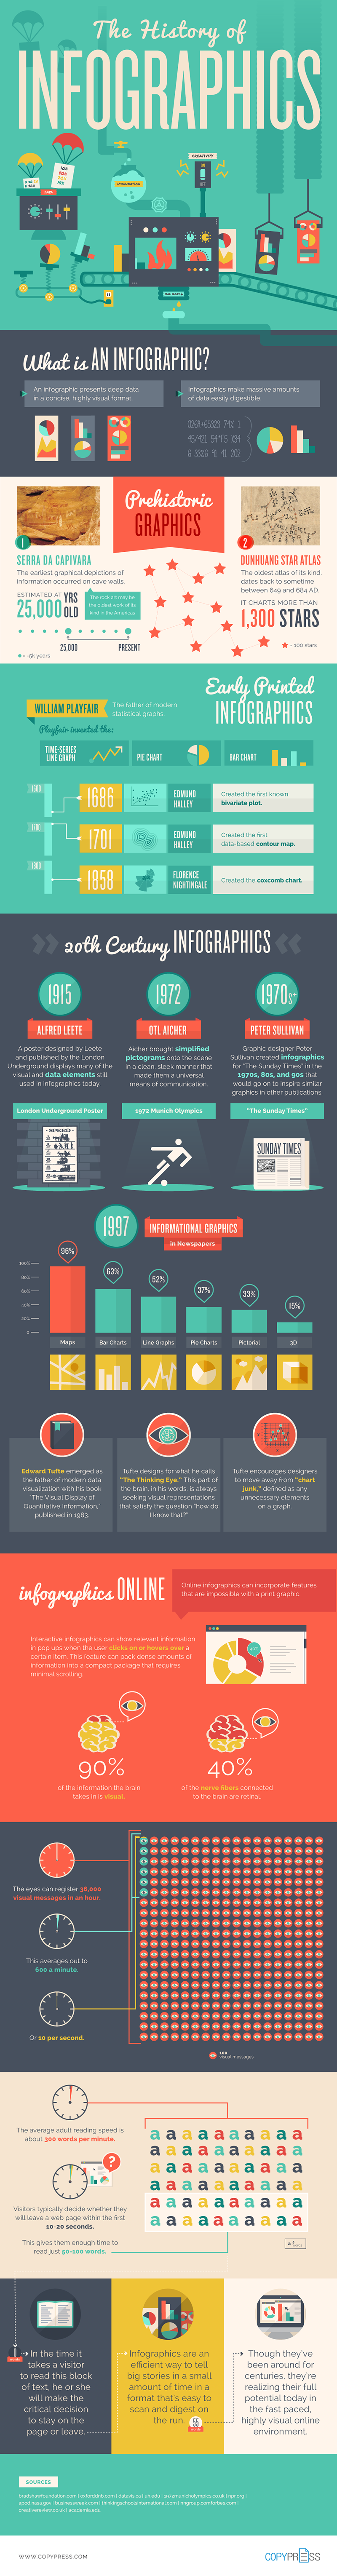 The History of Infographics